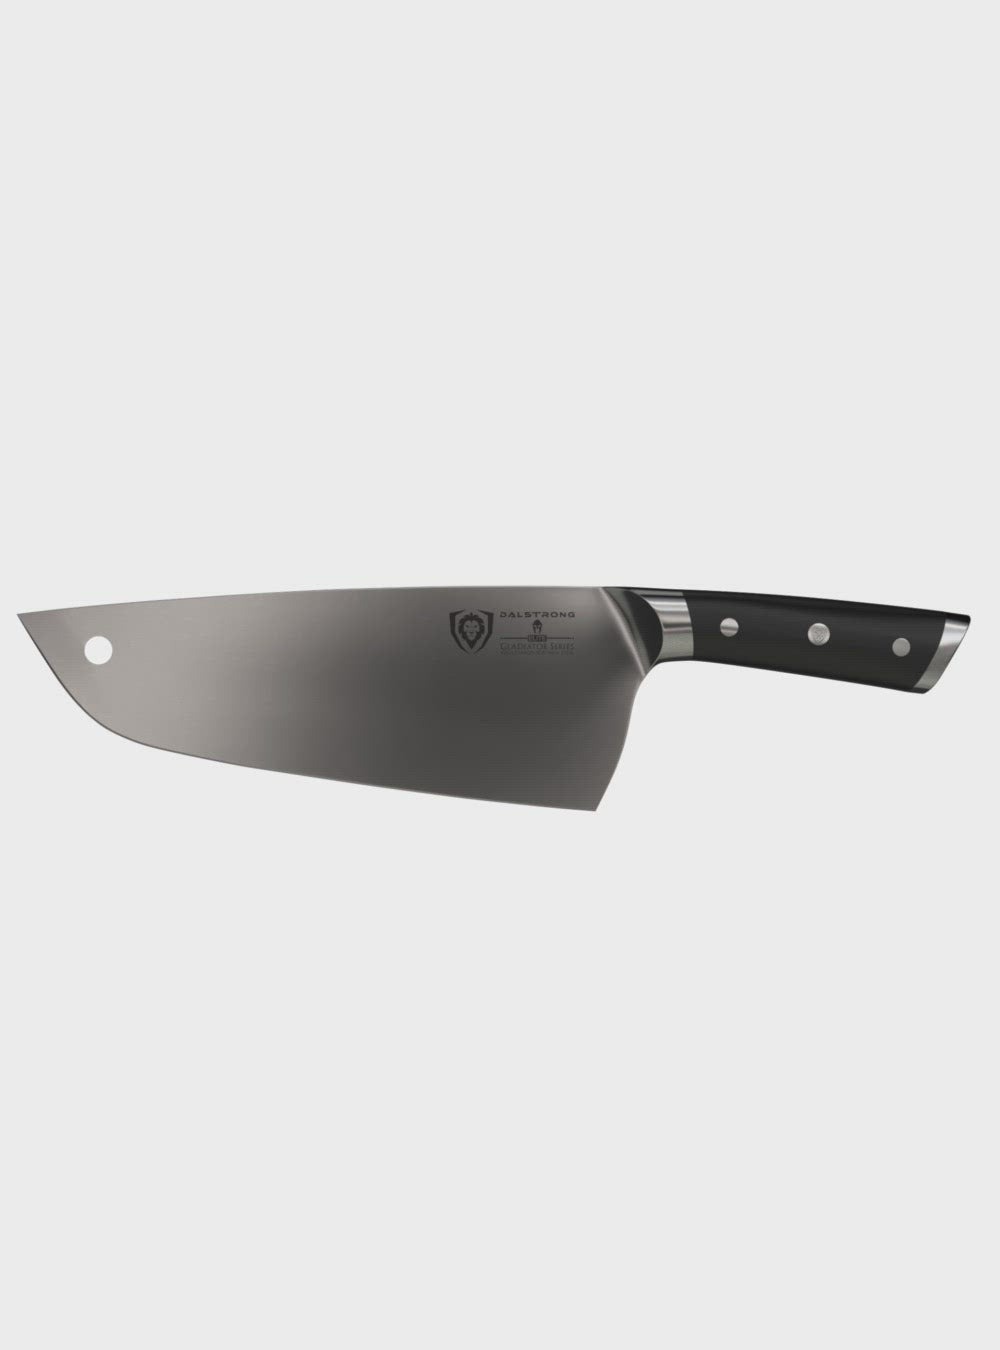 Dalstrong gladiator series 10 inch cleaver knife with black handle in all angles.